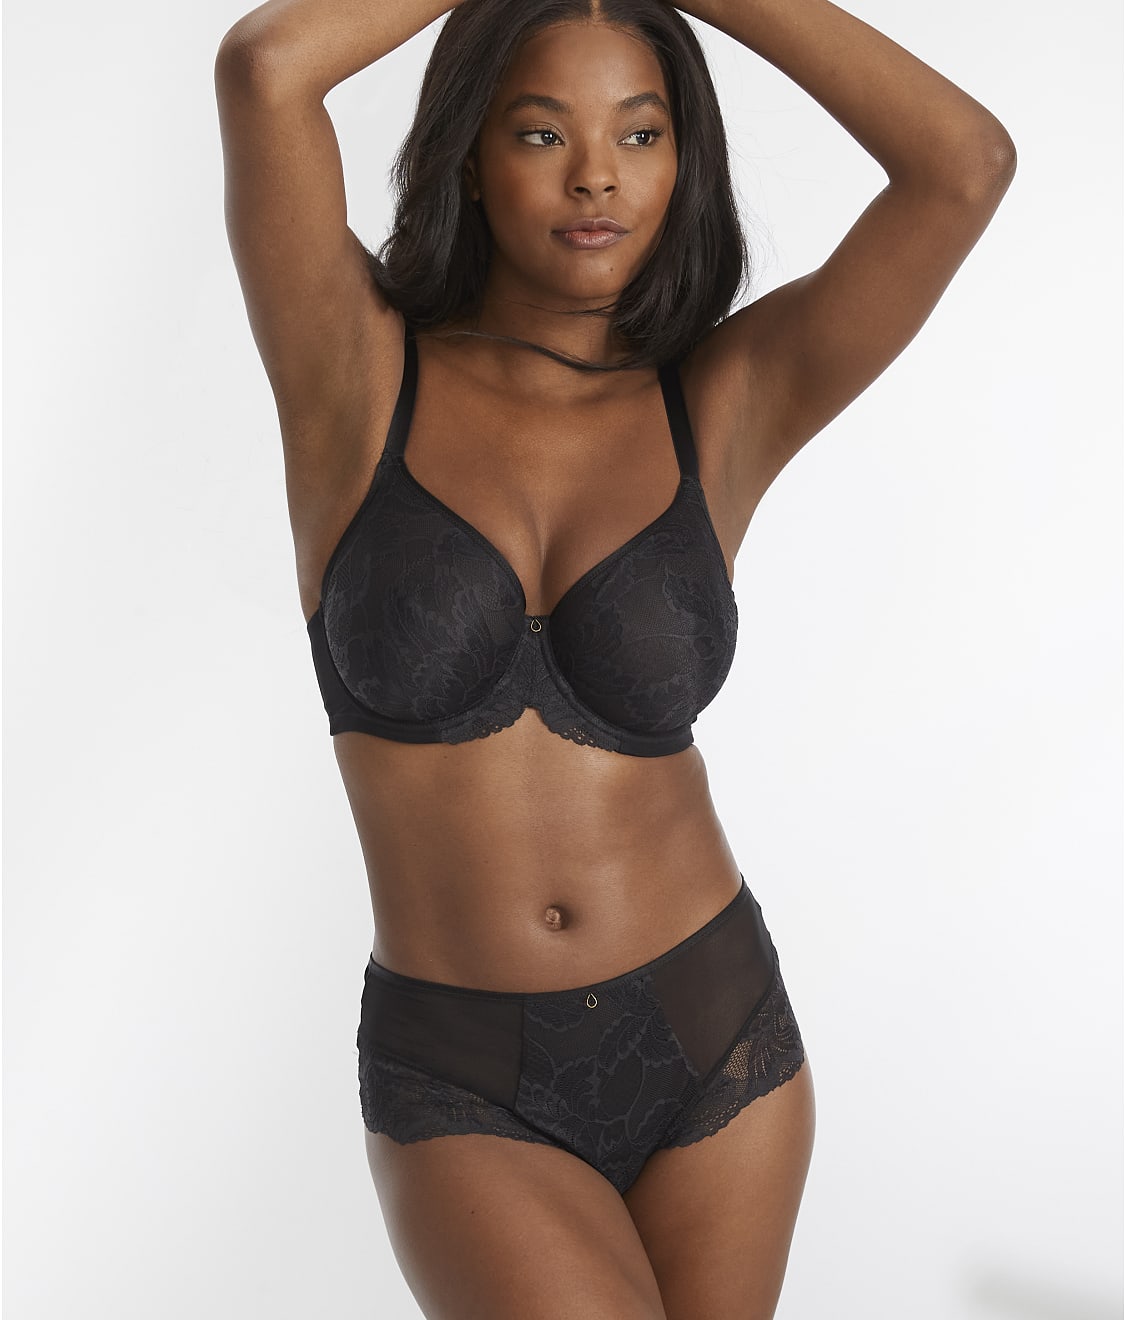 Panache Radiance Full Cup Moulded Bra - Black